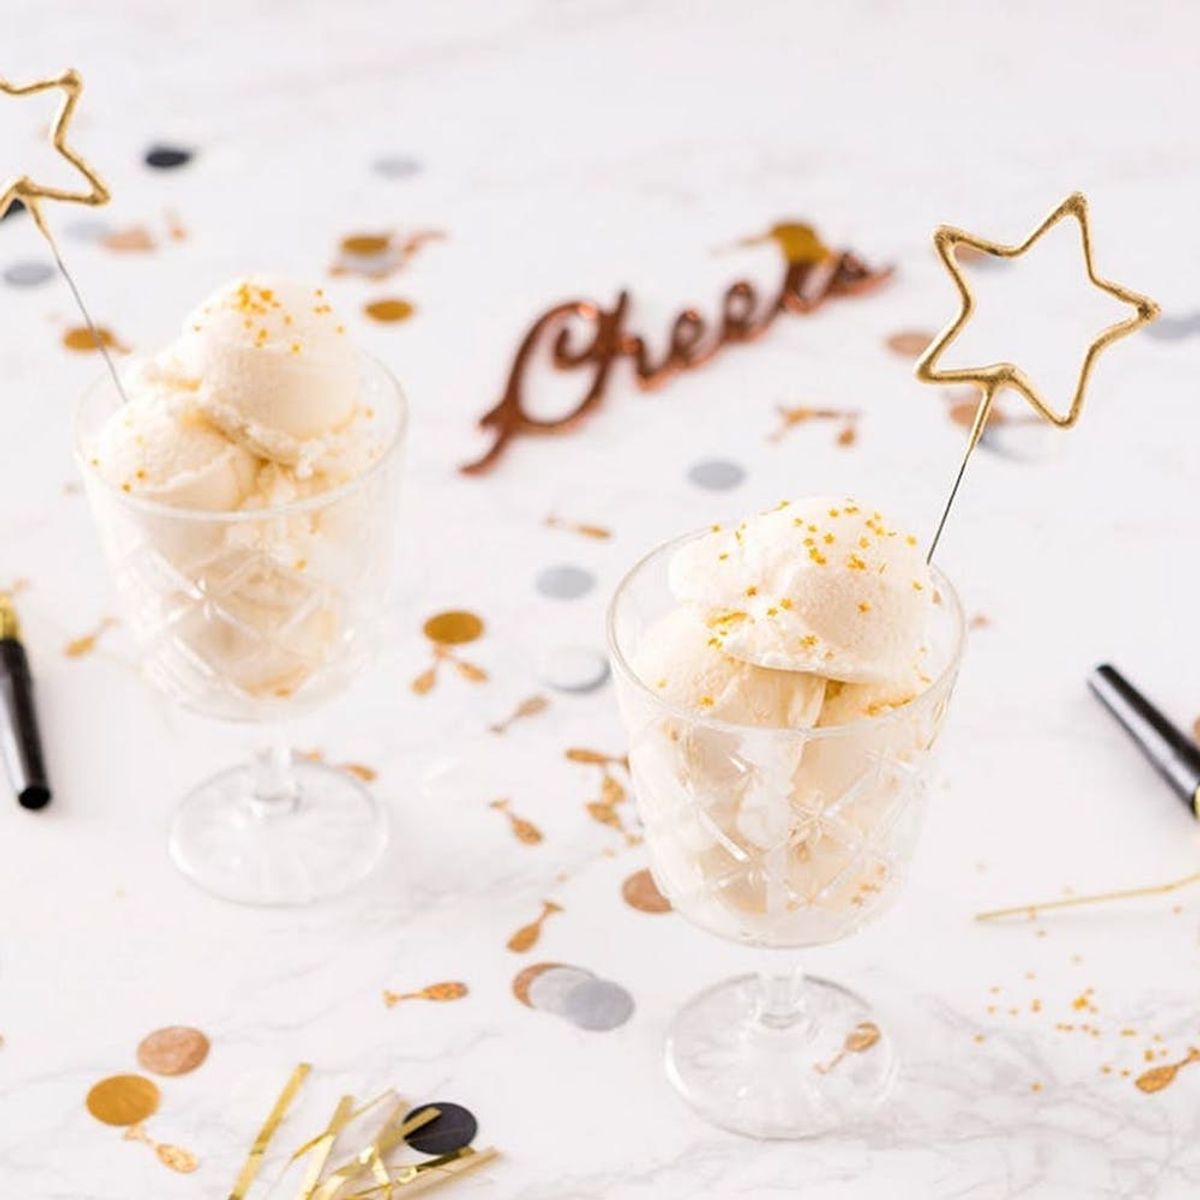 14 Glittery (and Totally Edible!) Treat Recipes for a Gilded New Year’s Eve